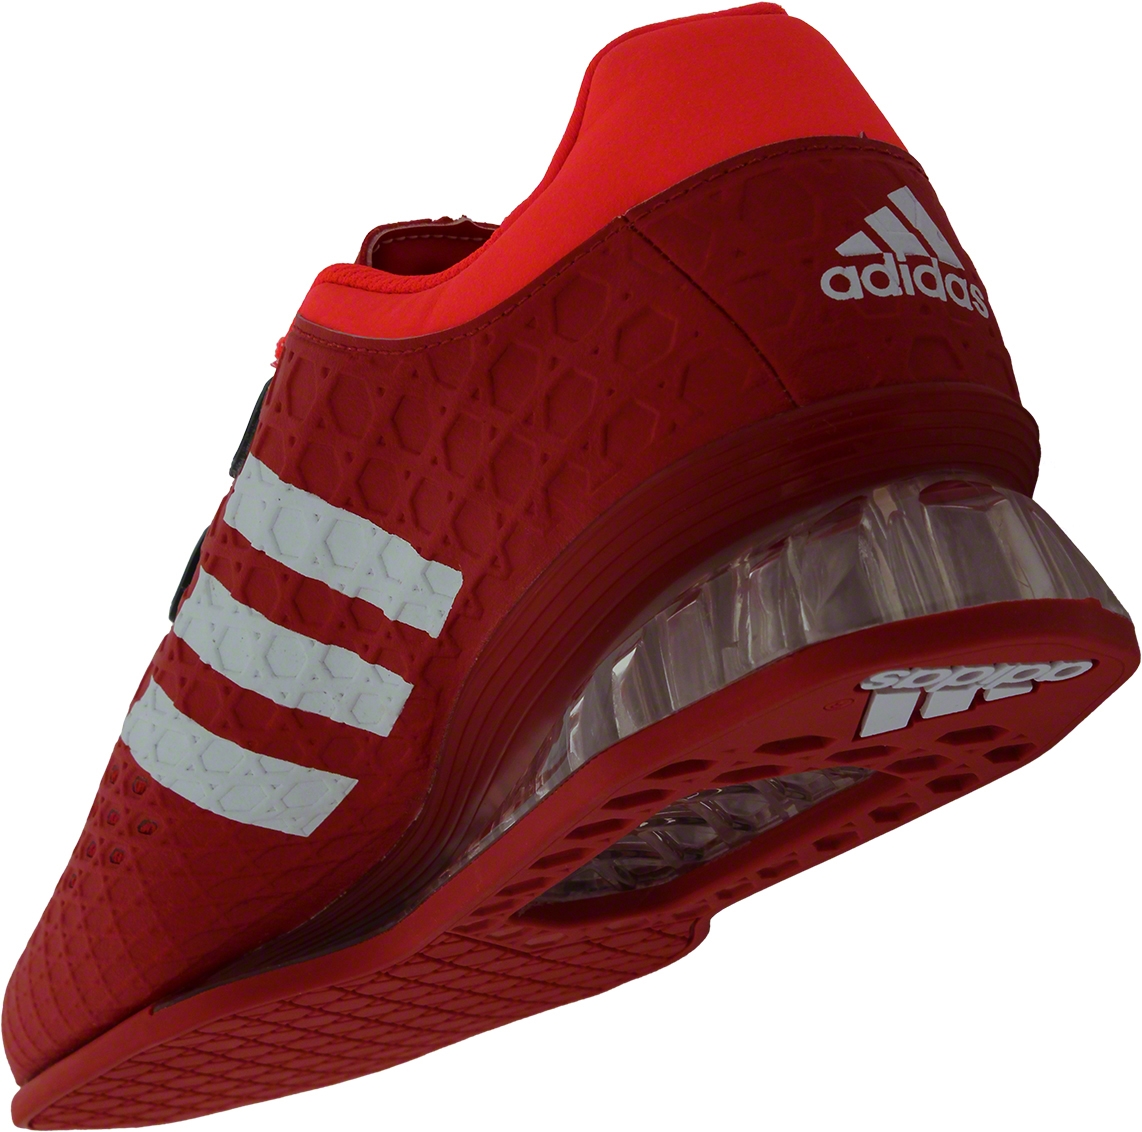 panic Forgiving suffering adidas Leistung.16 Weightlifting Shoes model AF5541